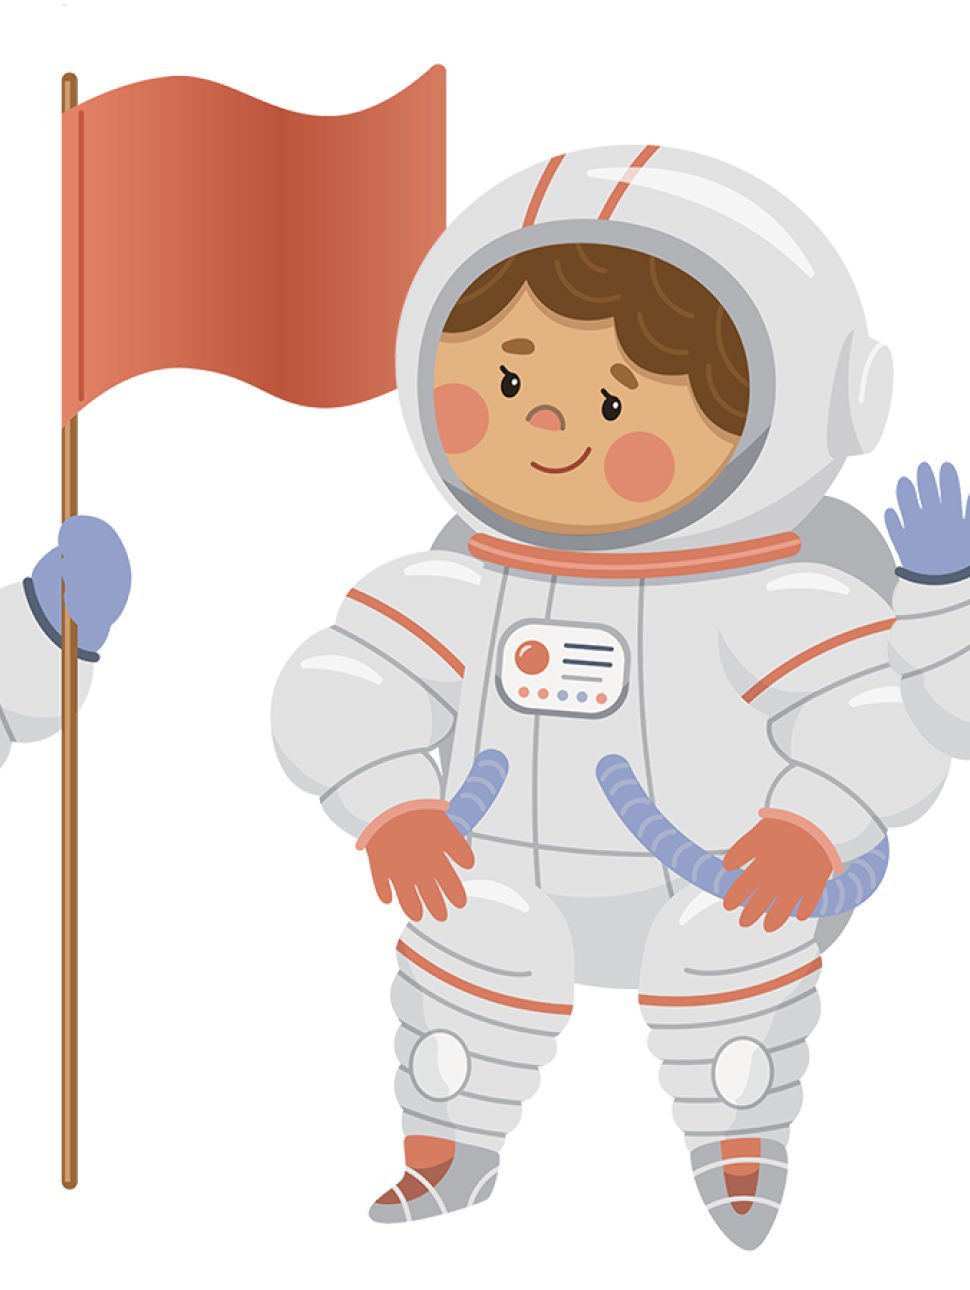 an illustration of astronauts in protective clothing with one holding a flag